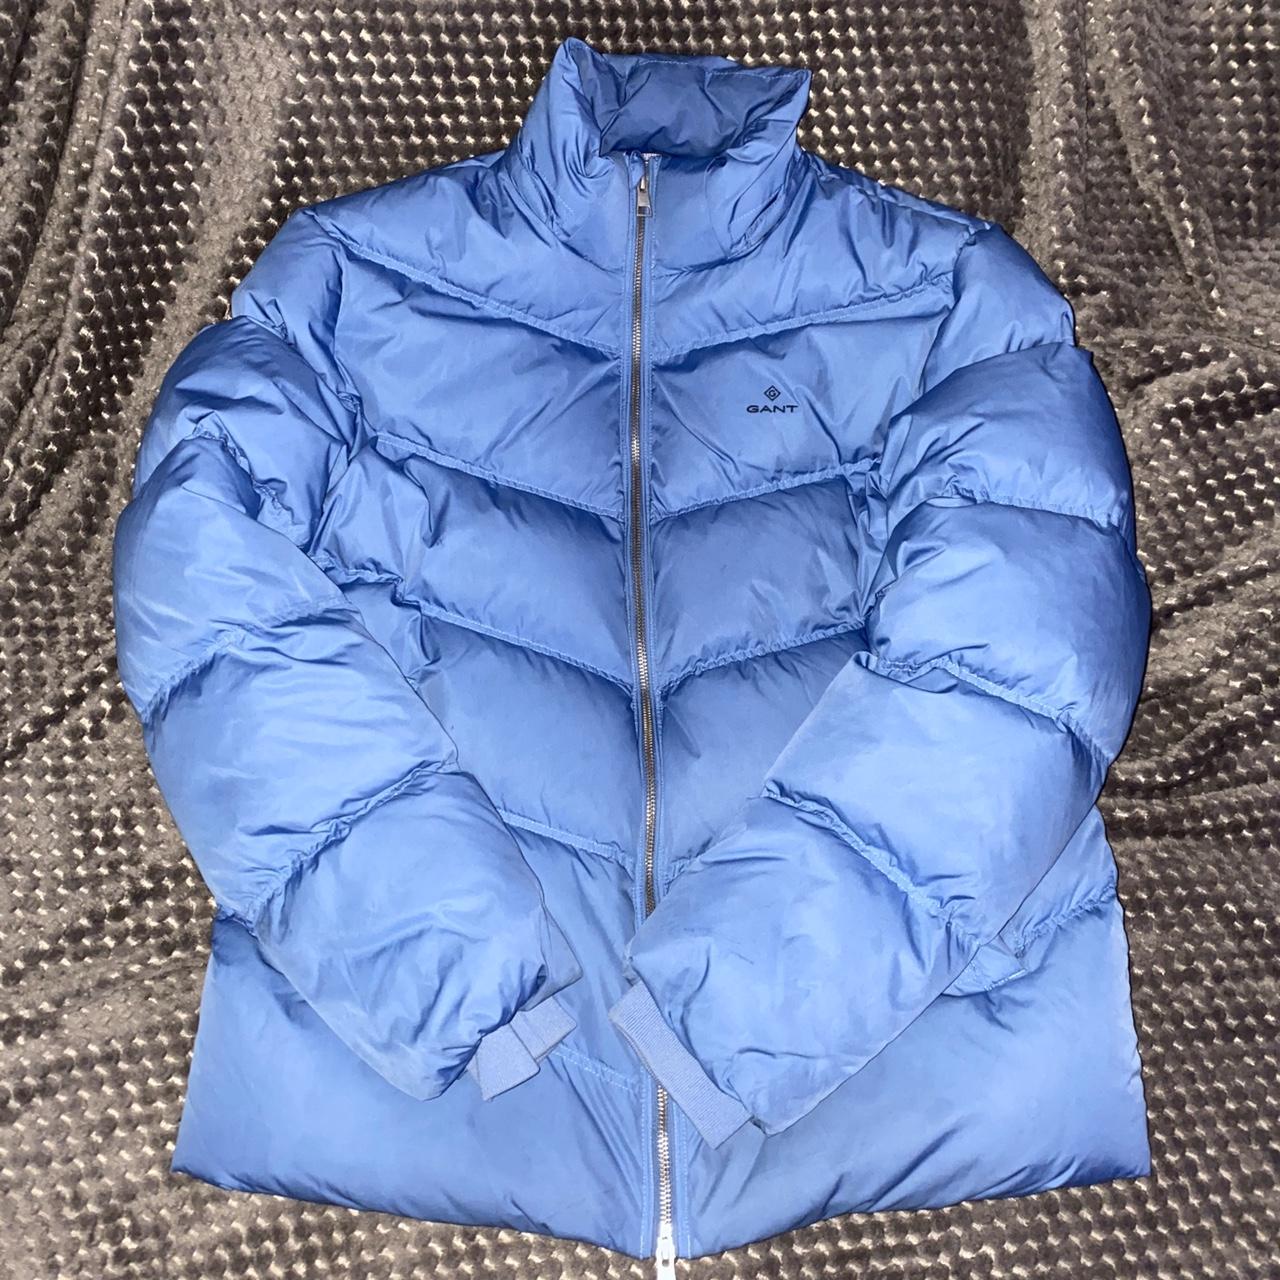 GANT Puffer Jacket For some reason when you put... - Depop